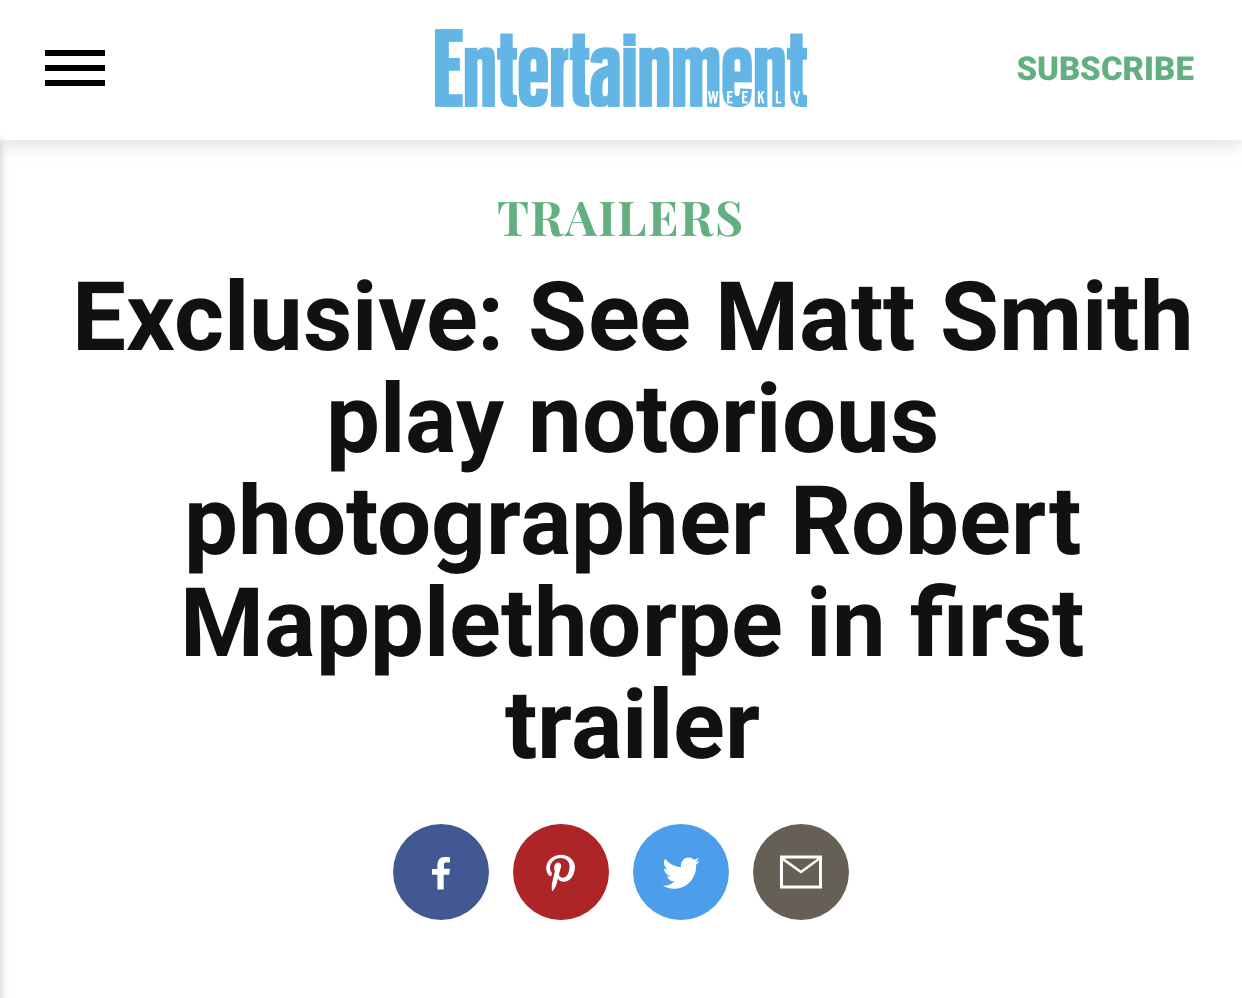 Exclusive: See Matt Smith play notorious photographer Robert Mapplethorpe in first trailer